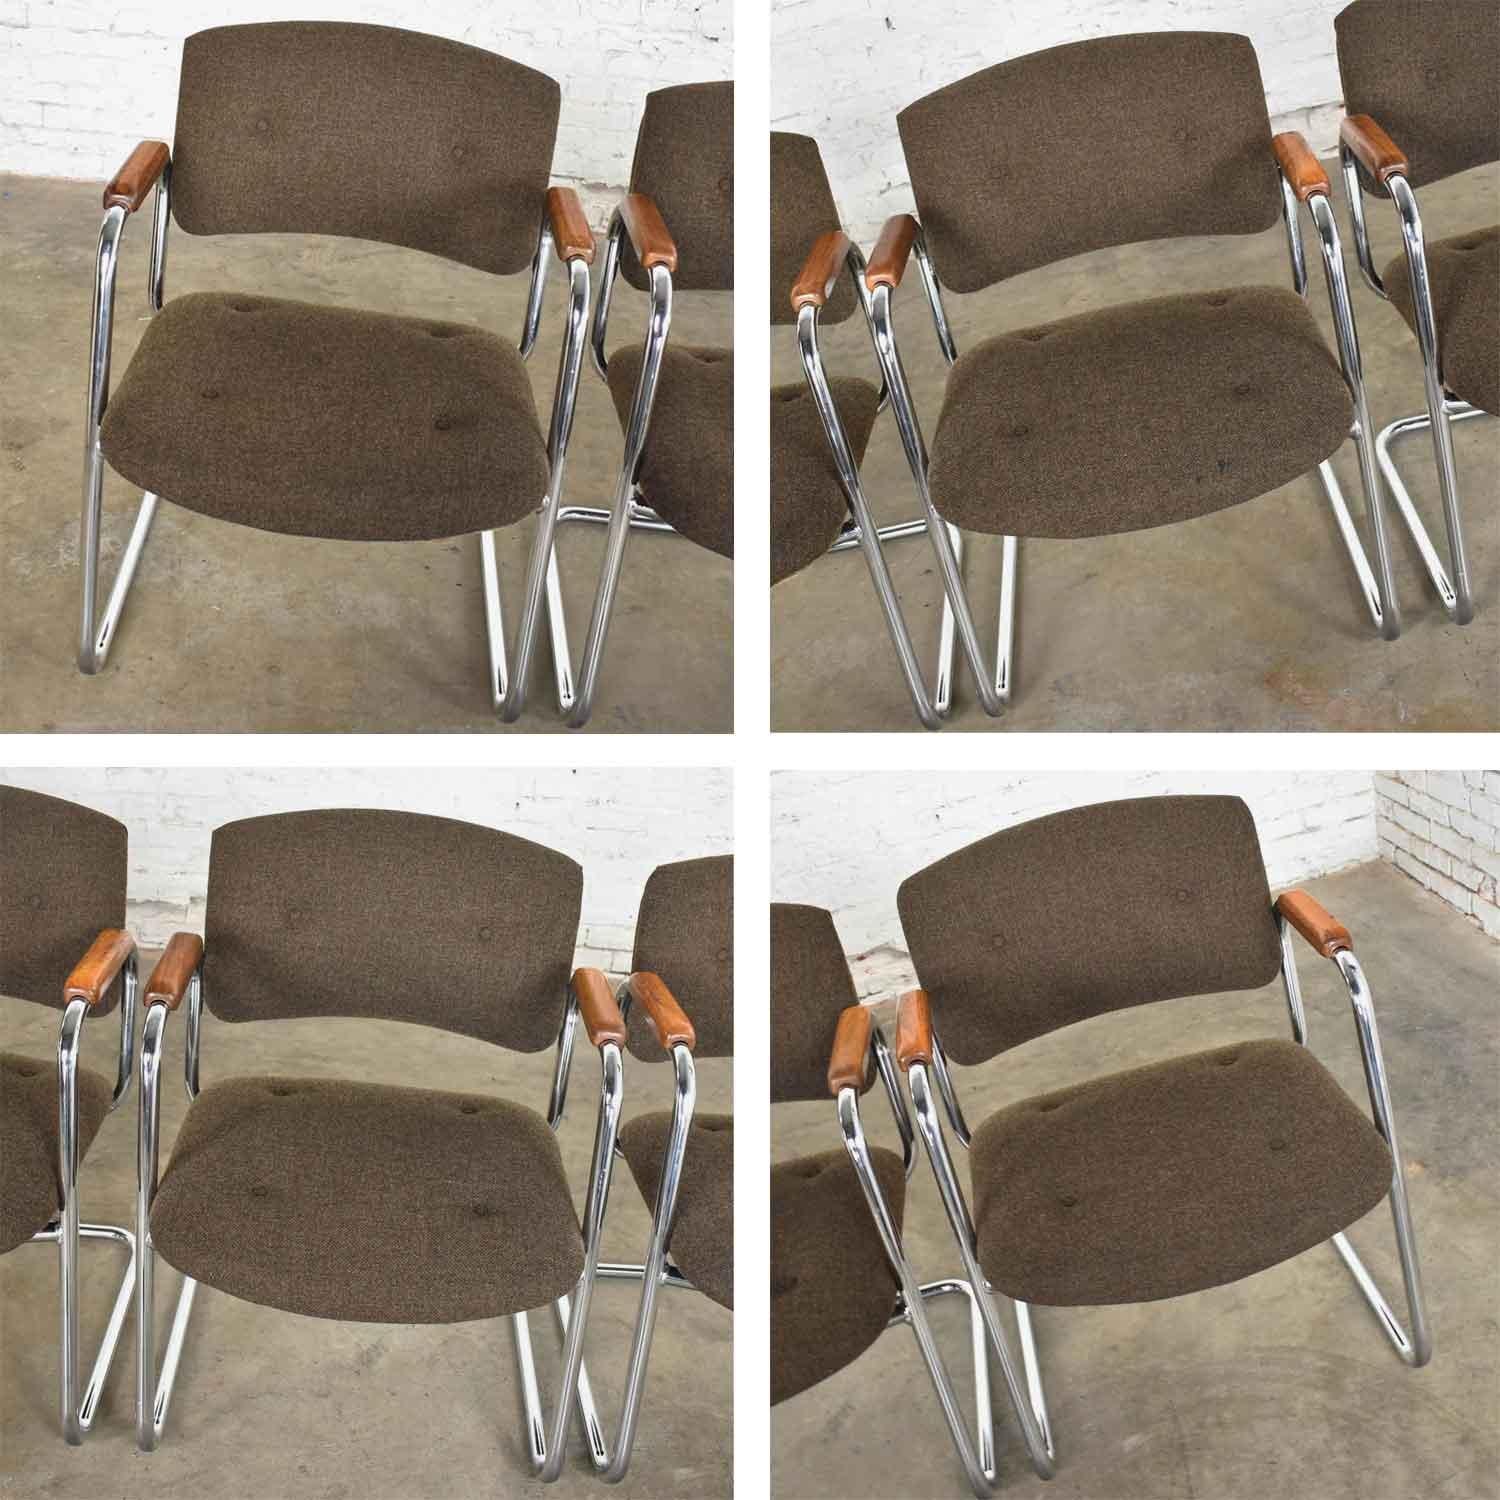 4 Cantilever Armchairs Chrome Brown w/ Wood Arms Style of Steelcase or Pollock 7